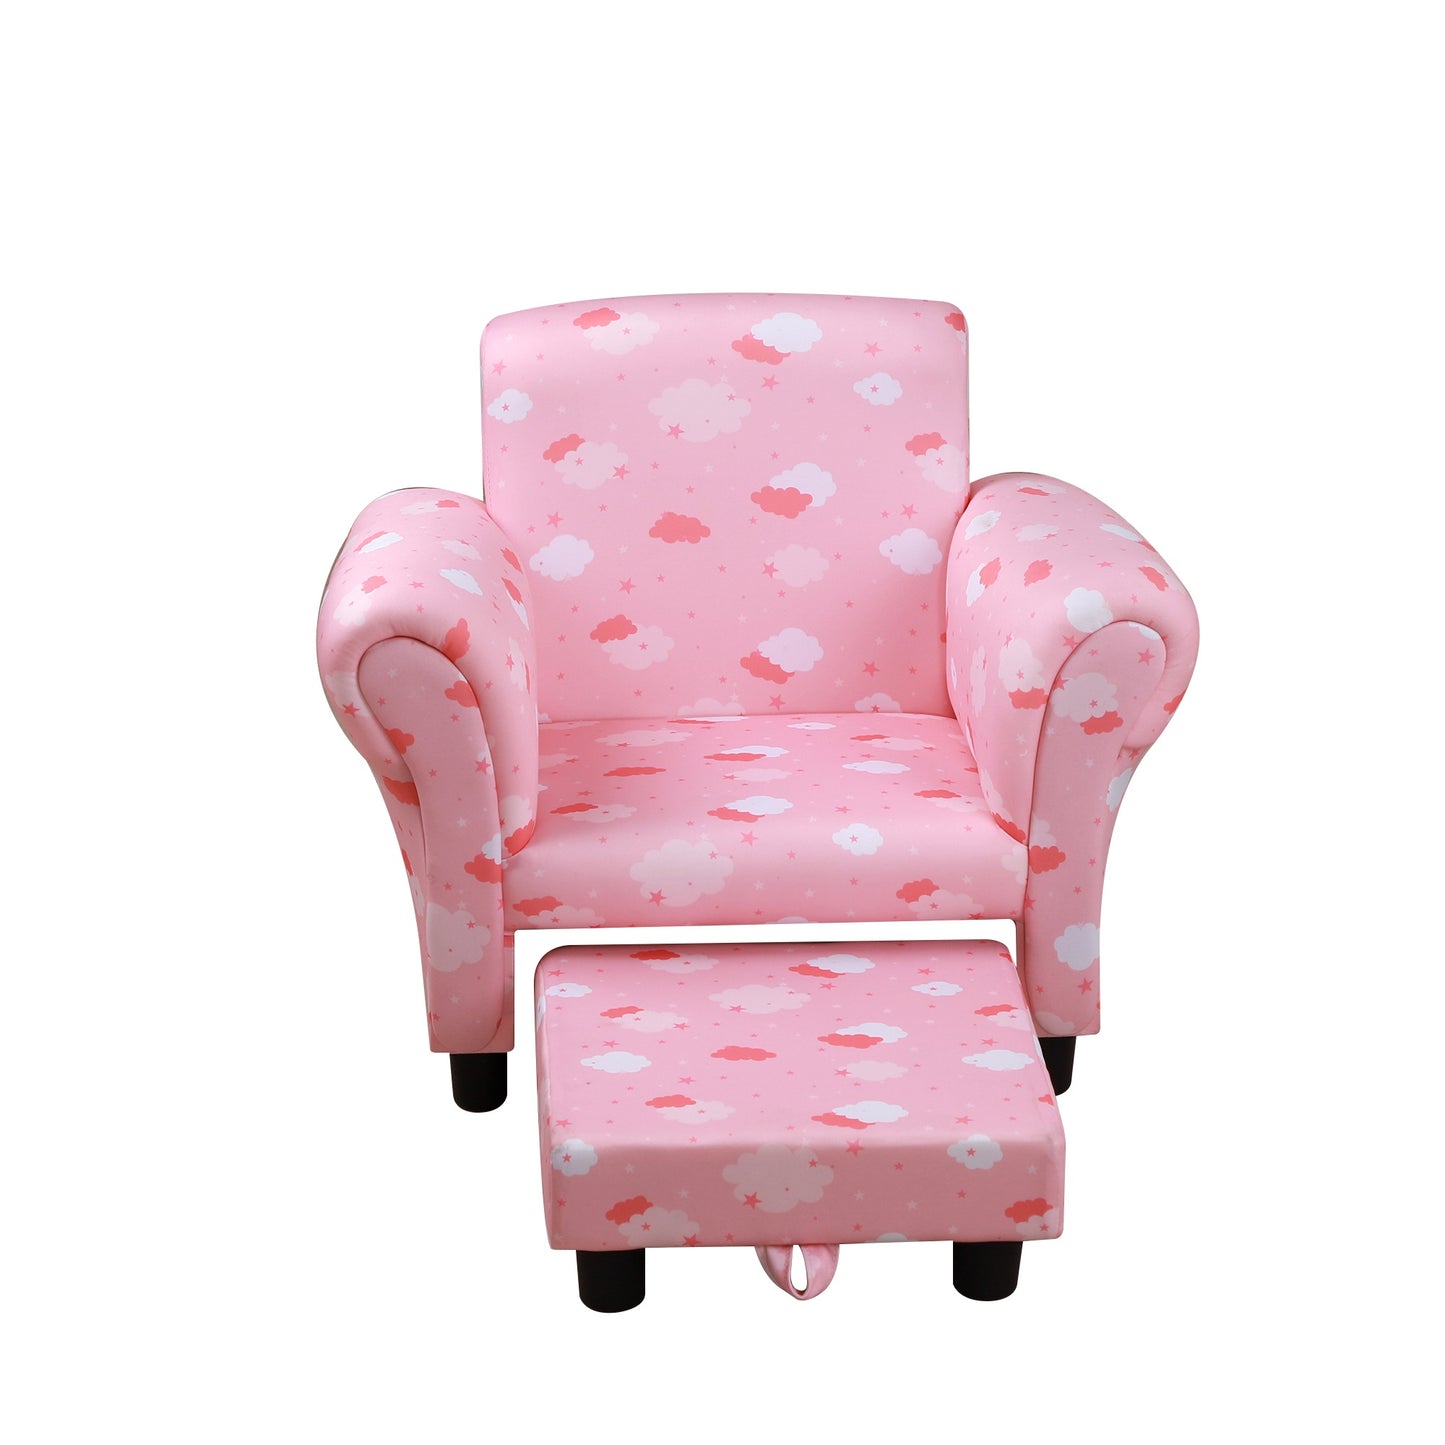 HOMCOM Kids Polyester Upholstered Clouds Armchair w/ Footrest Pink